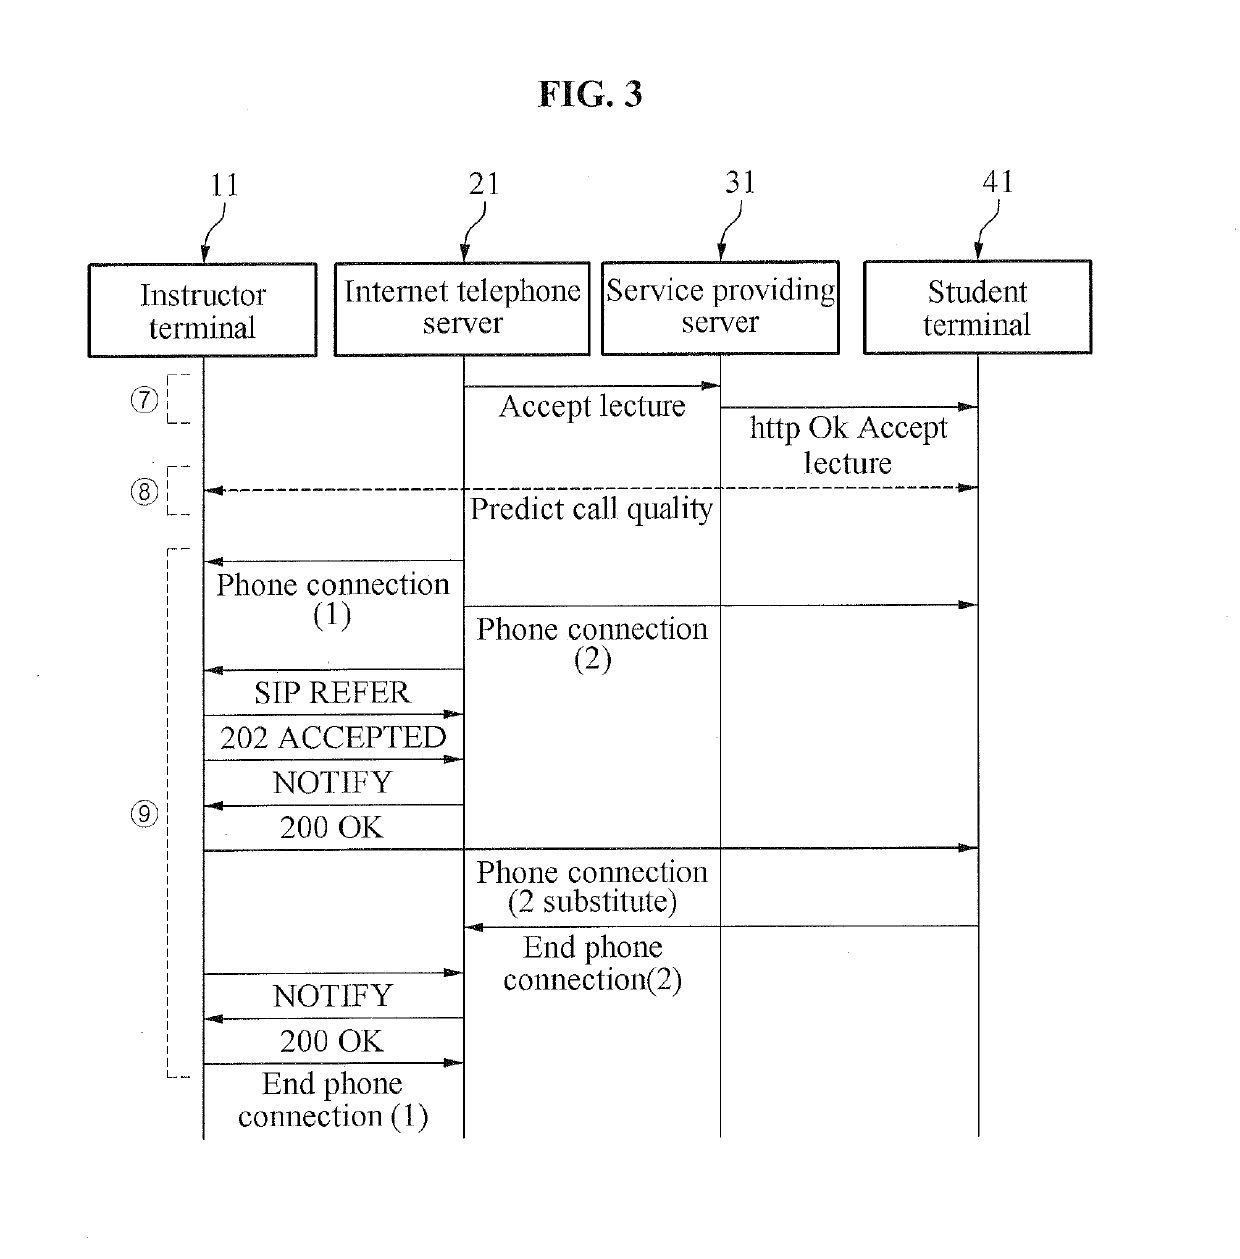 Method for supporting real-time matching between instructor and student in telephony lecture